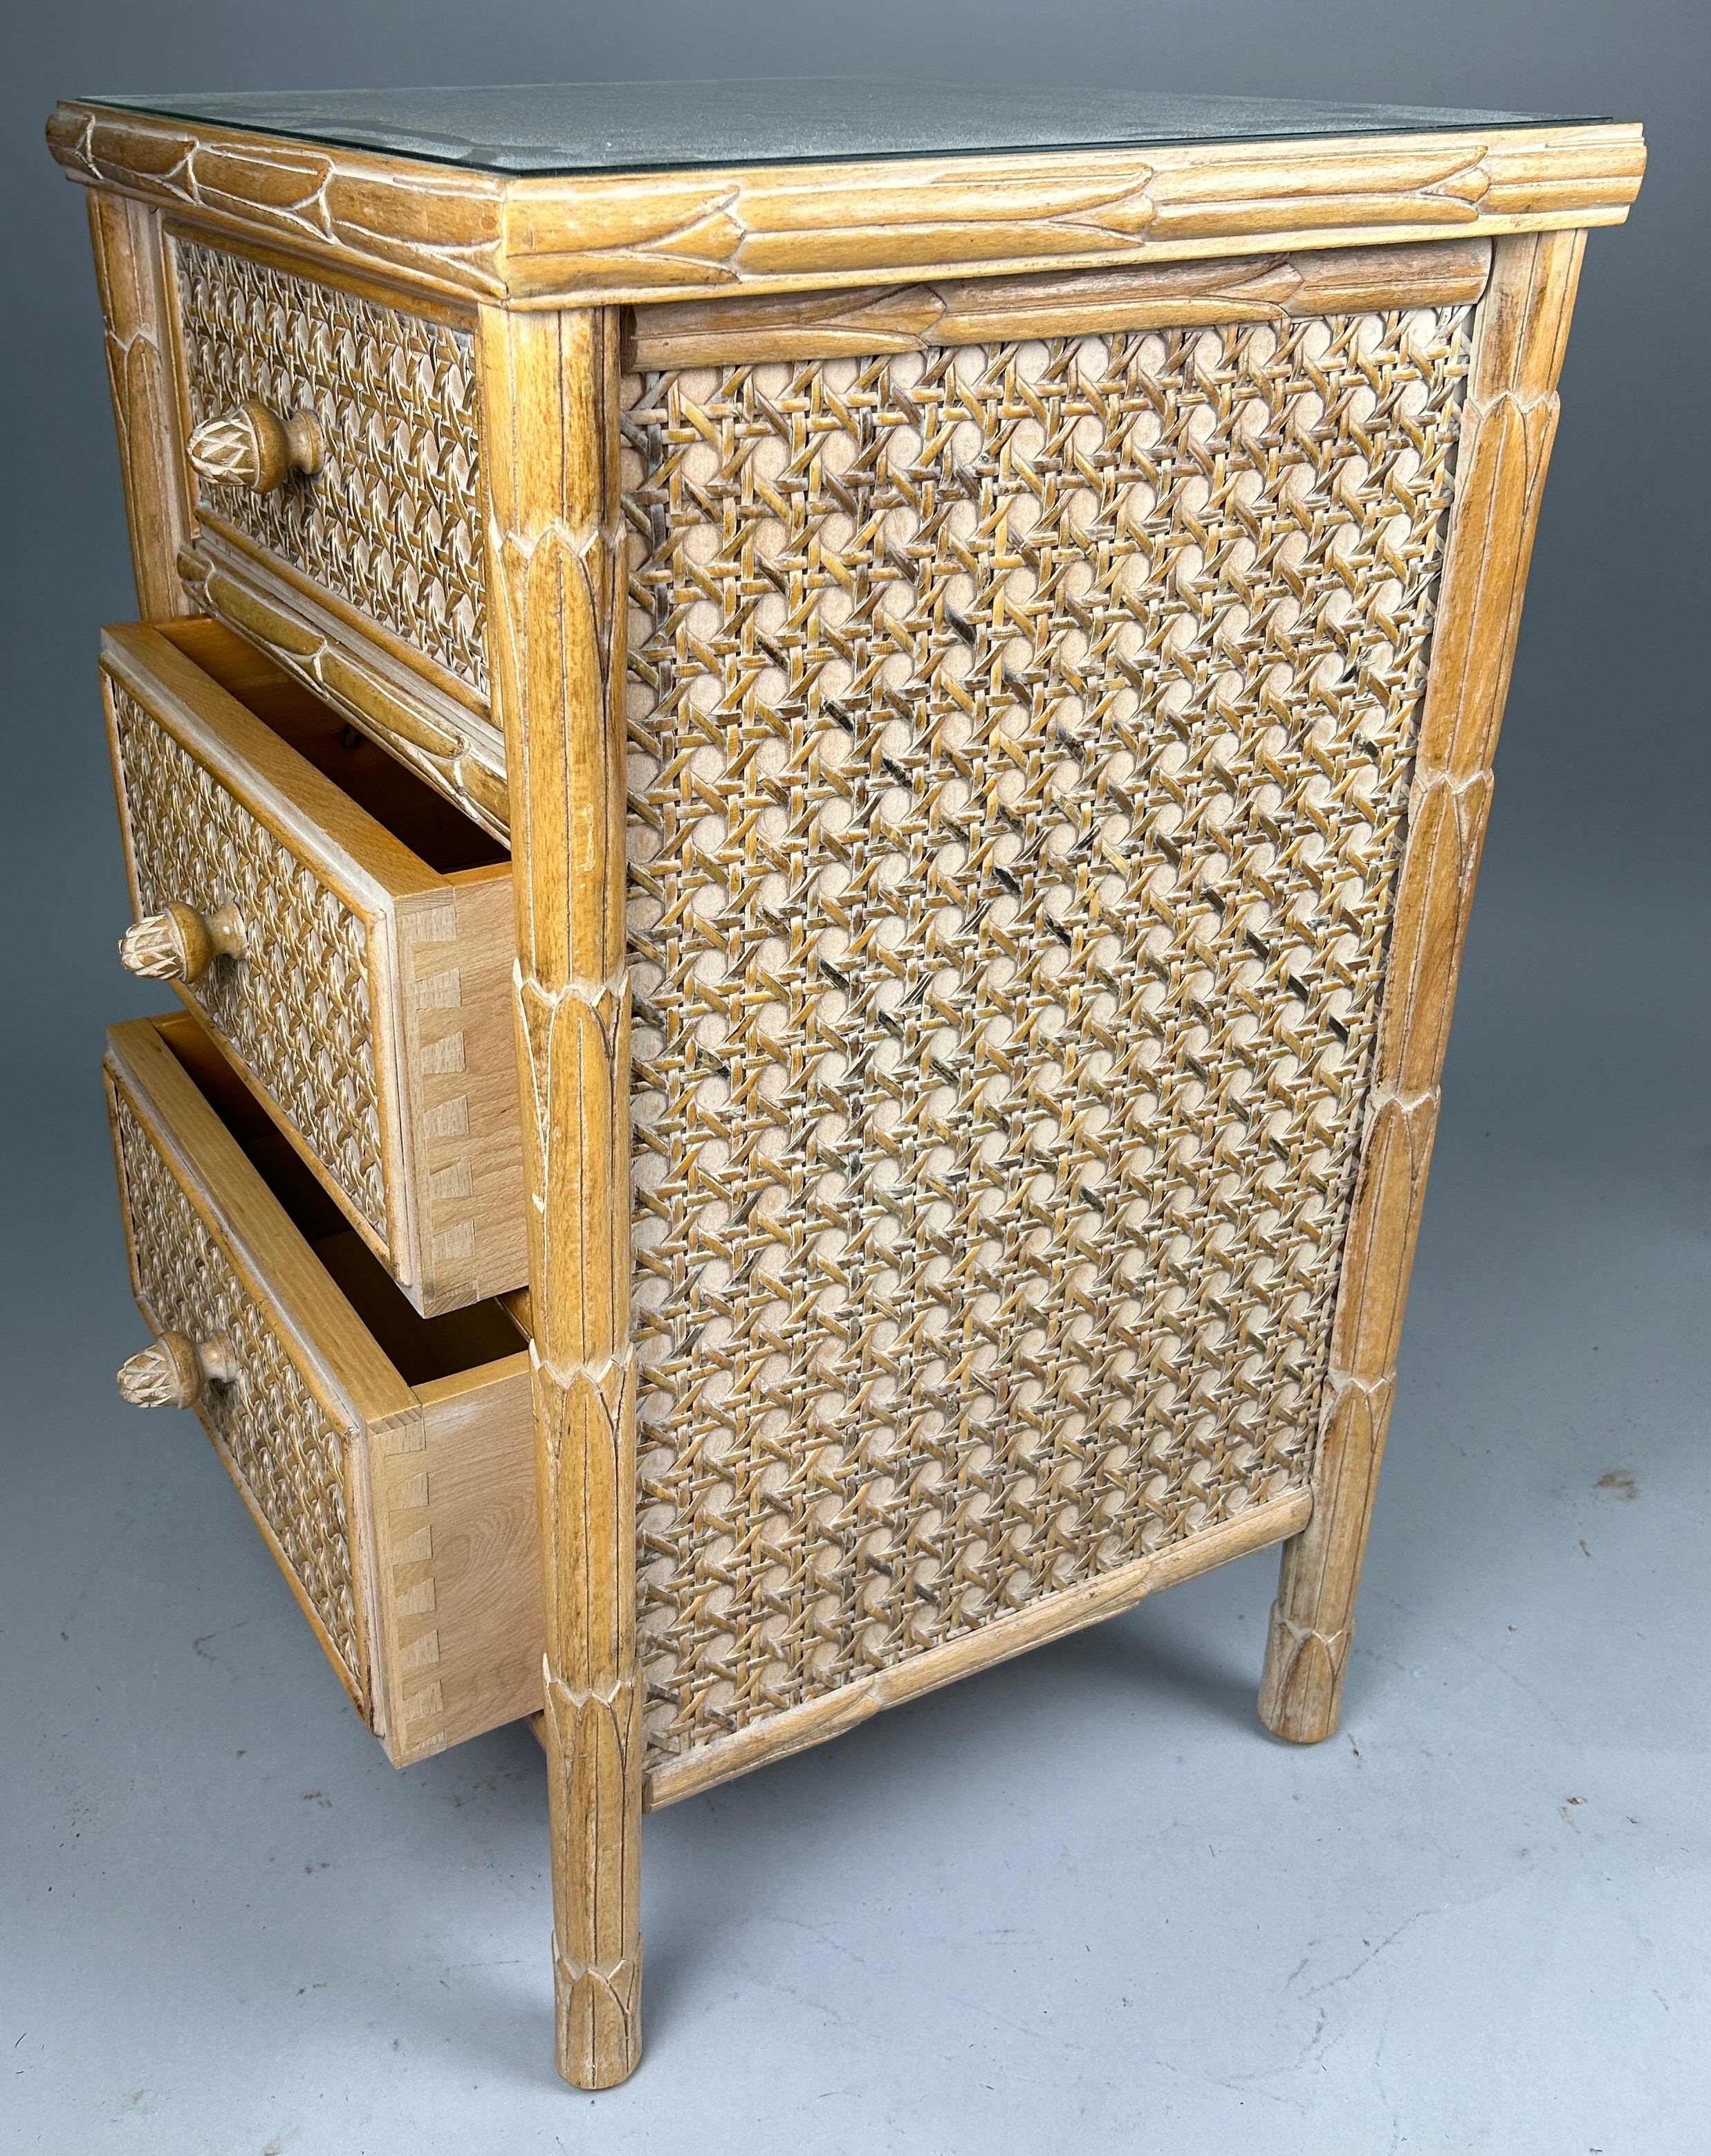 A LIMED WOOD AND CANE BEDSIDE TABLE WITH GLASS TOP 78cm x 50cm x 45cm - Image 3 of 4